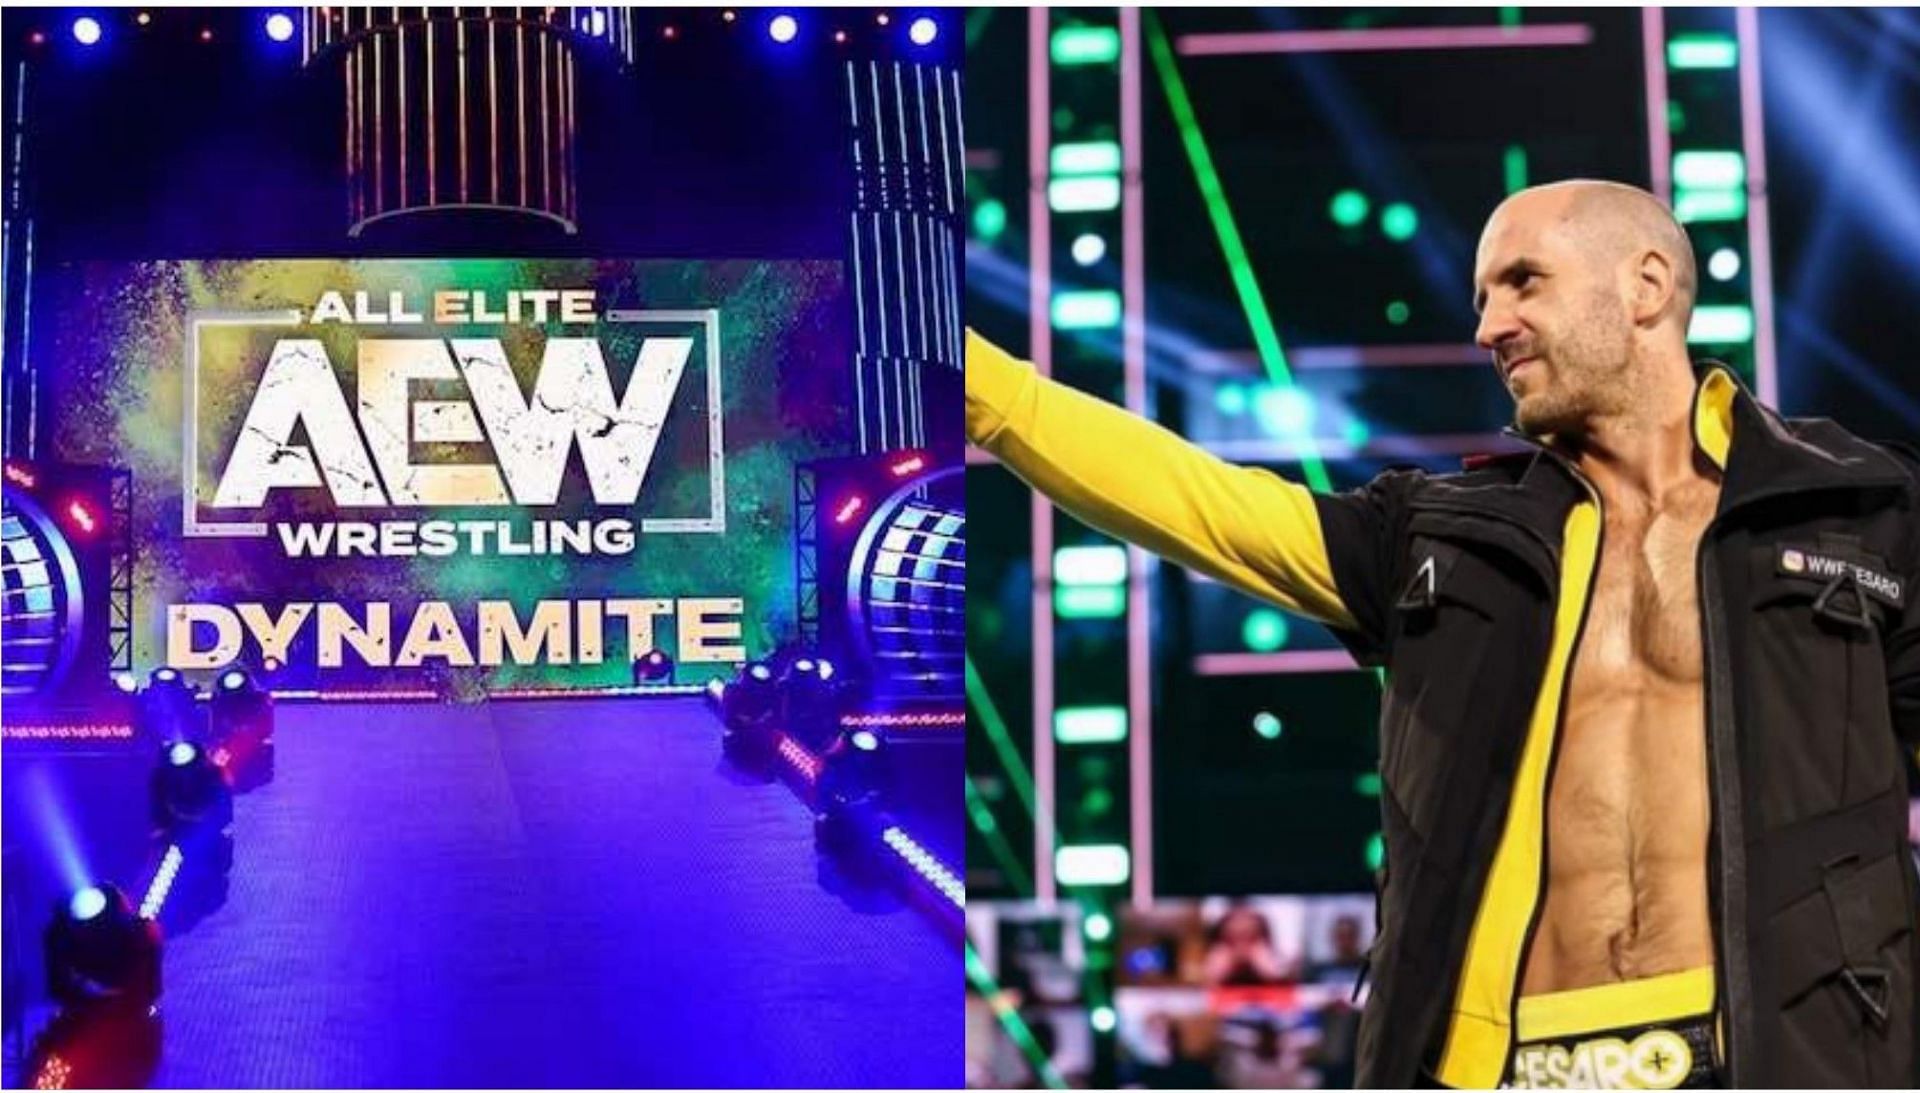 Is AEW going to be the next wrestling destination for Cesaro?